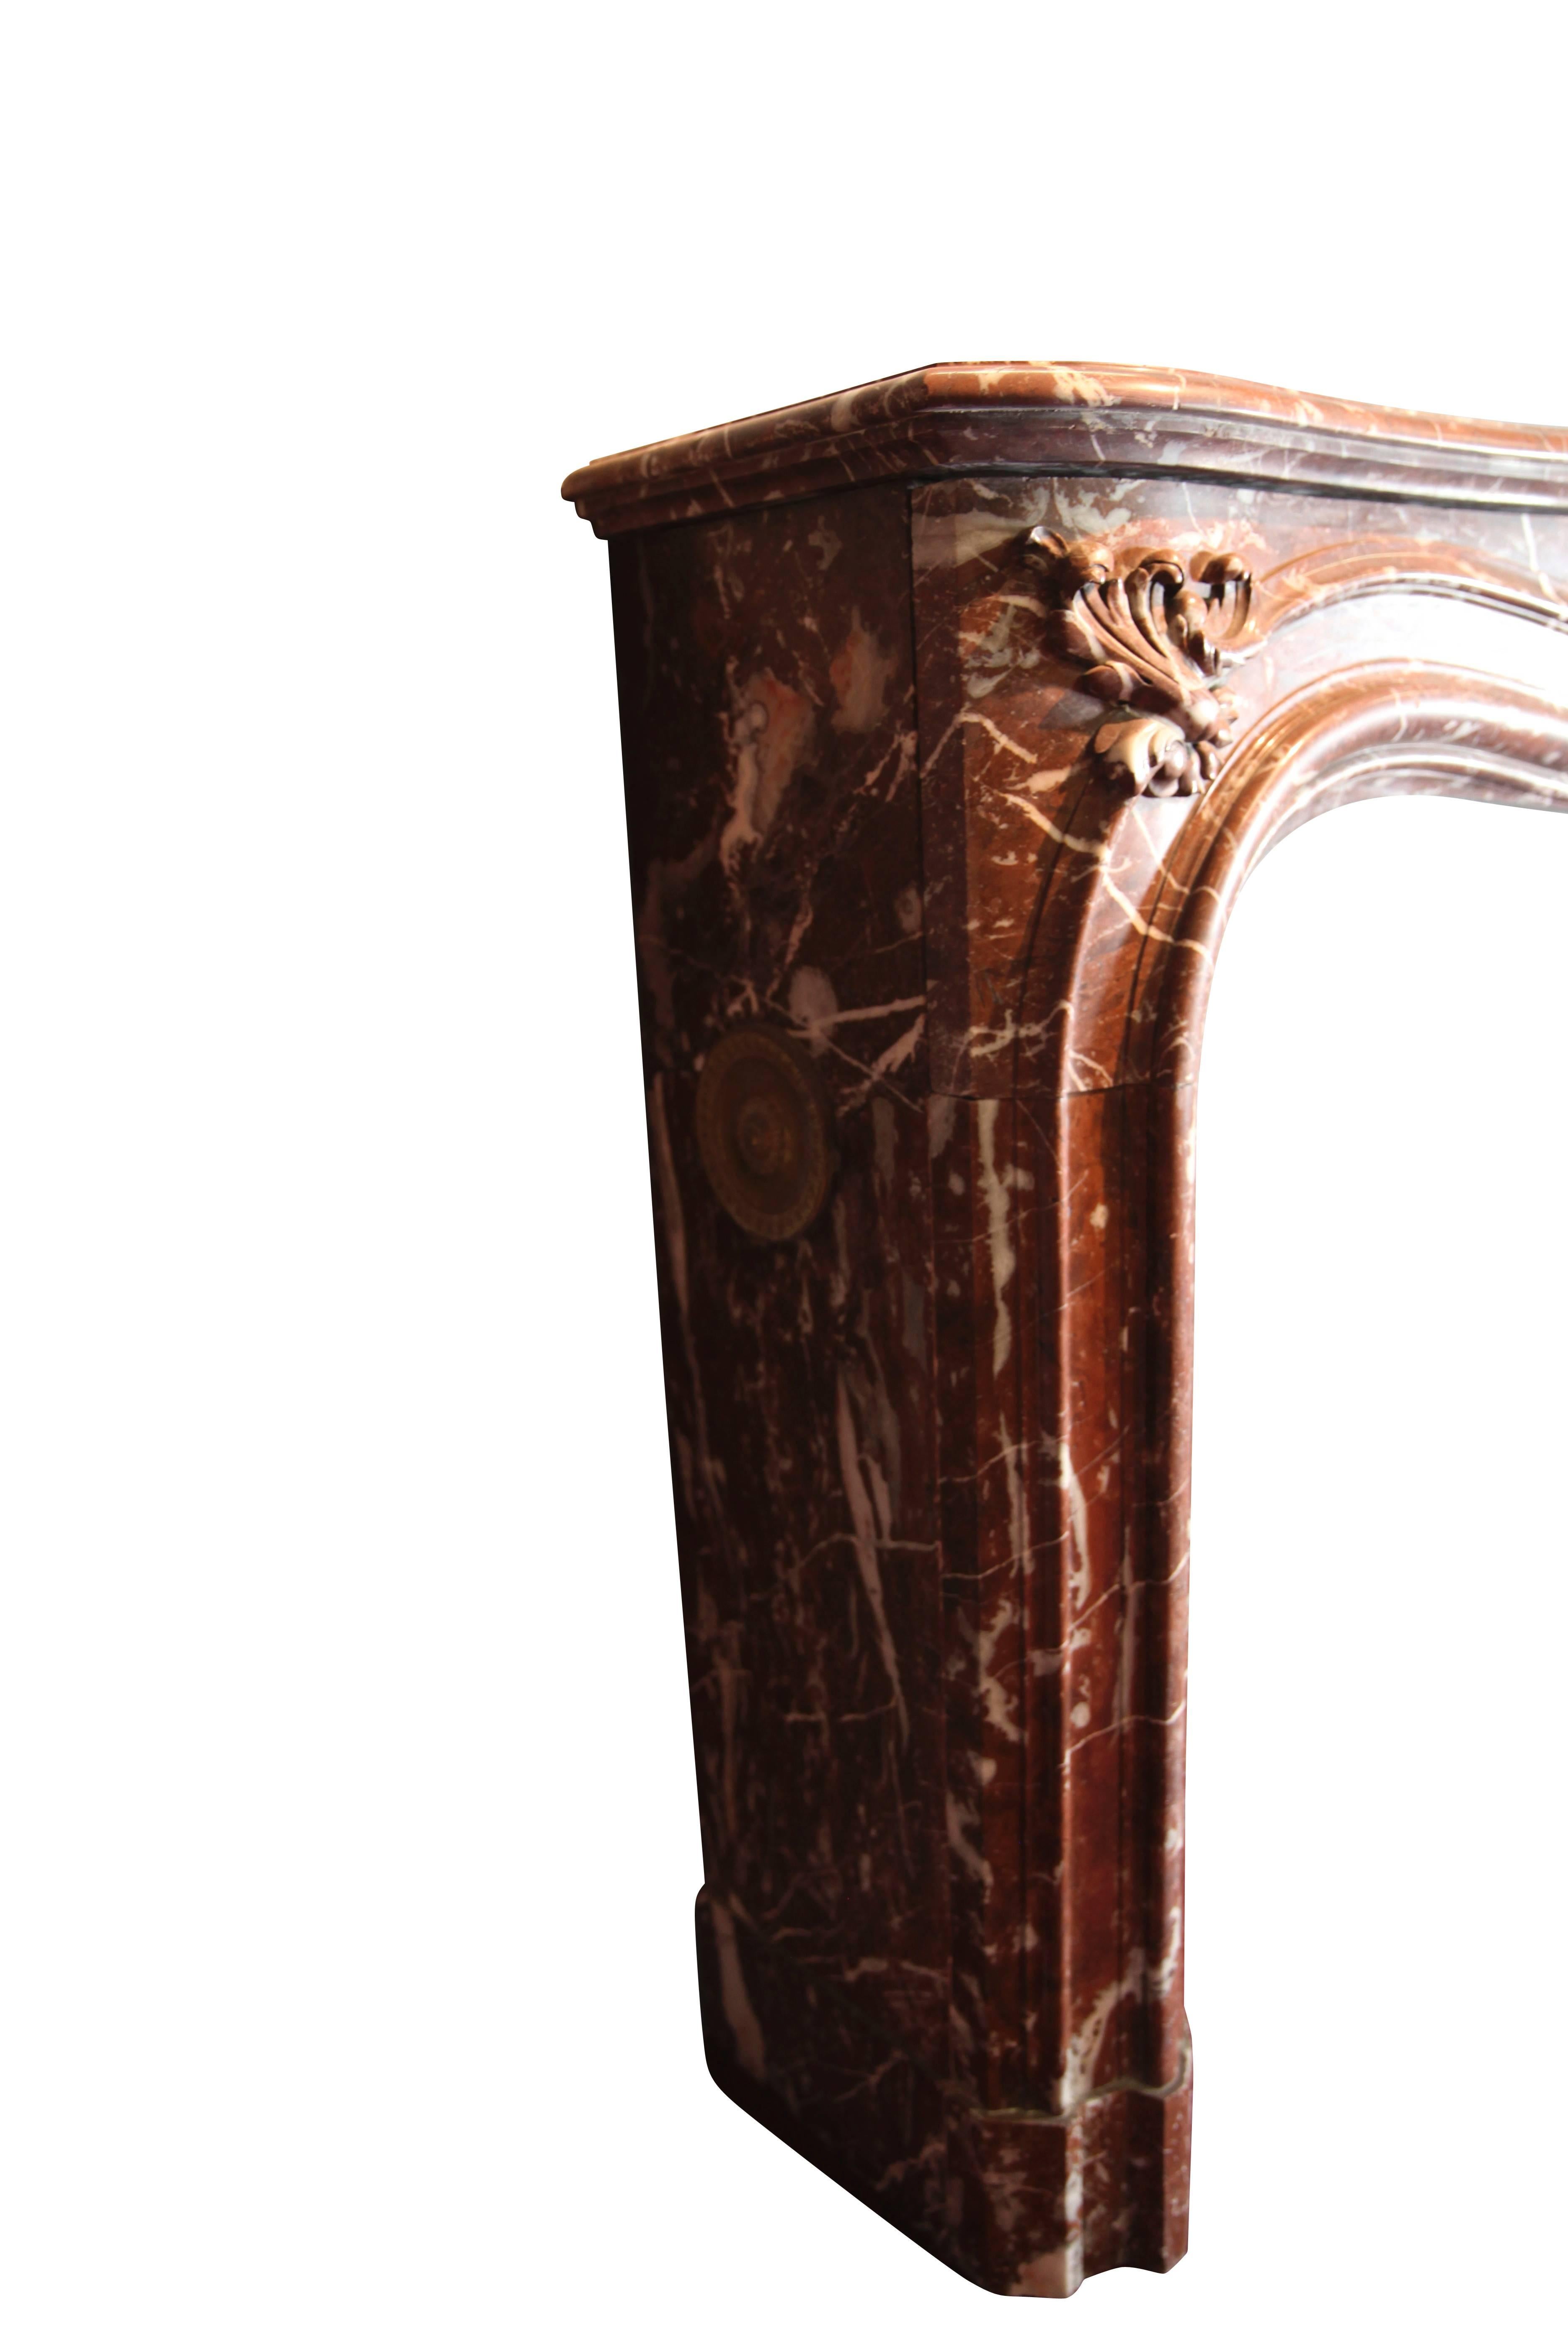 This is a Belgian red marble Regency style fireplace surround.

Measures: 
167 cm EW 65,75"
117 cm EH 46,06"
124 cm IW 48,81"
94 cm IH 37"
43 cm S 16,92"